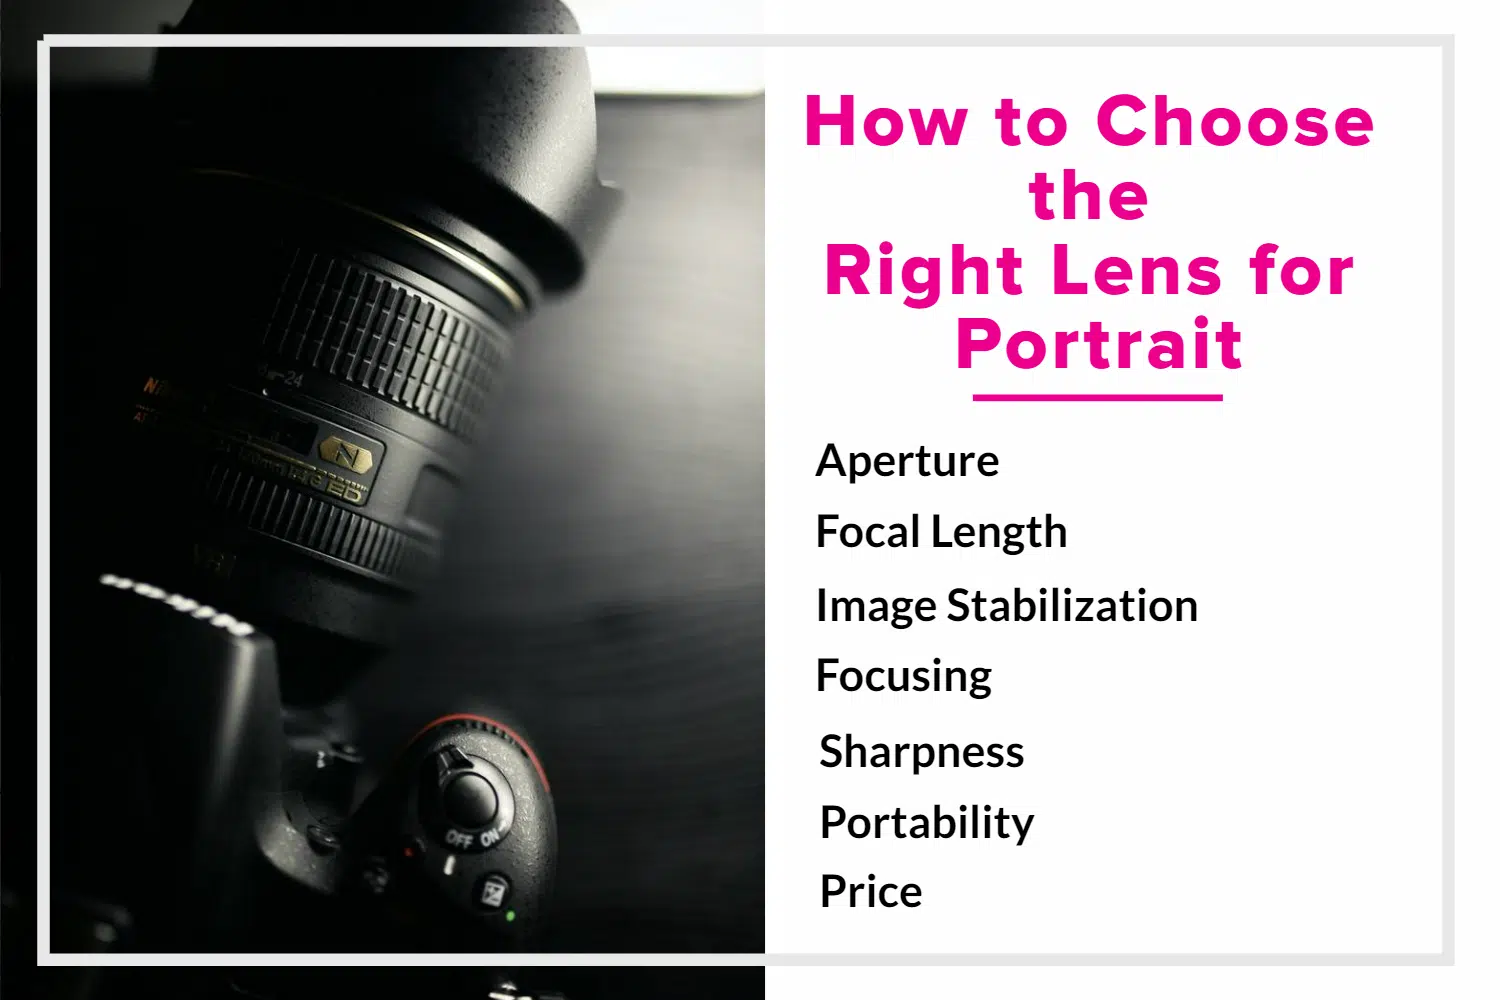 How to Choose the Right Lens for Portrait